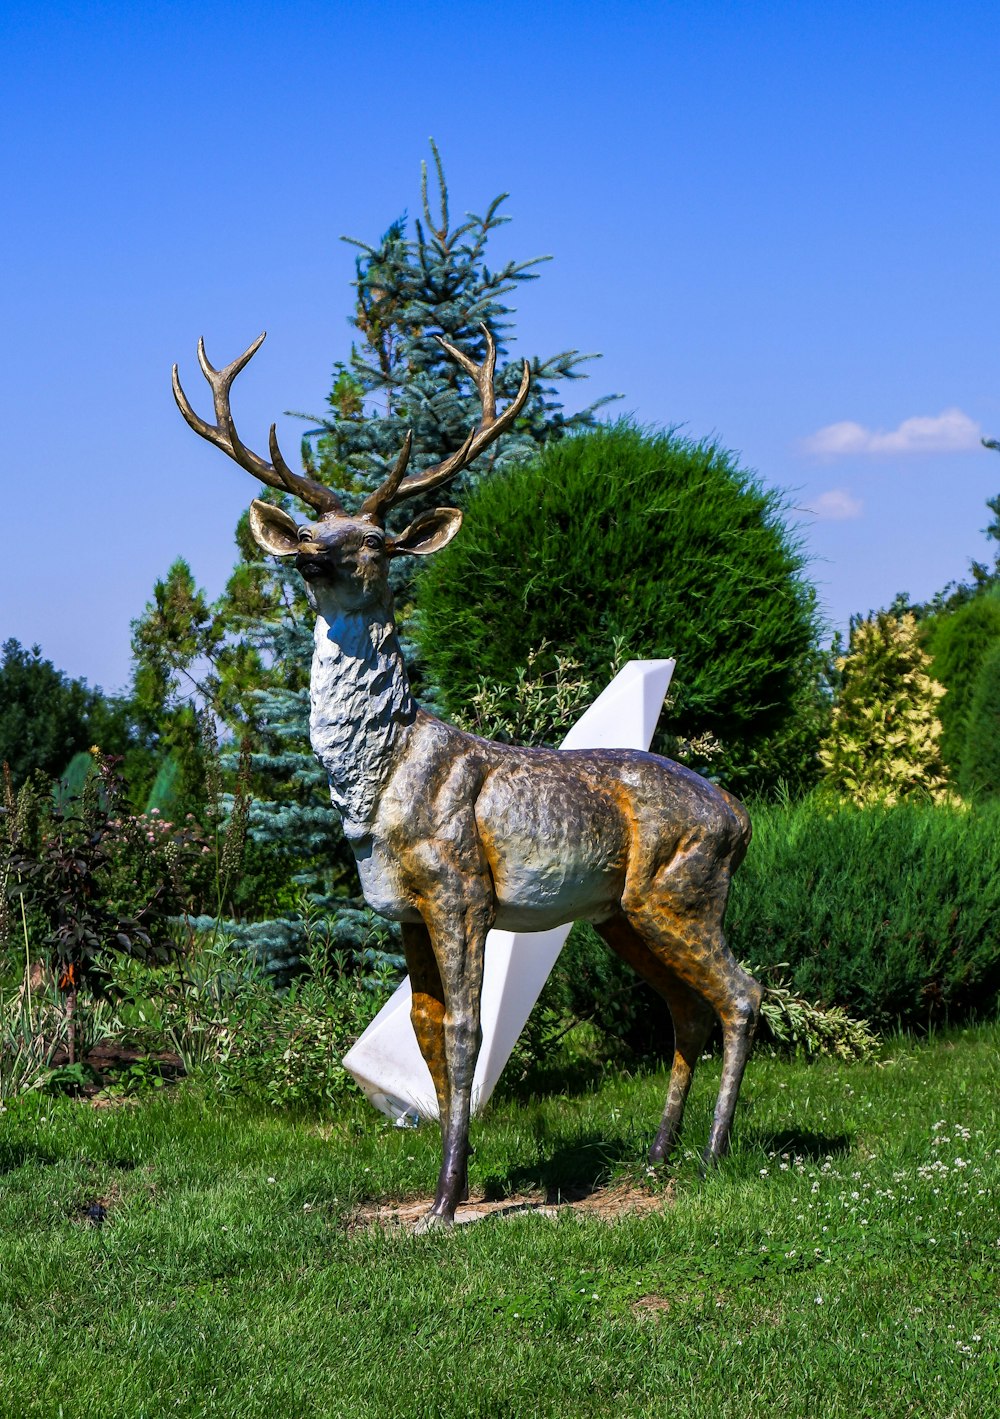 a deer with antlers in a grassy area with trees in the background